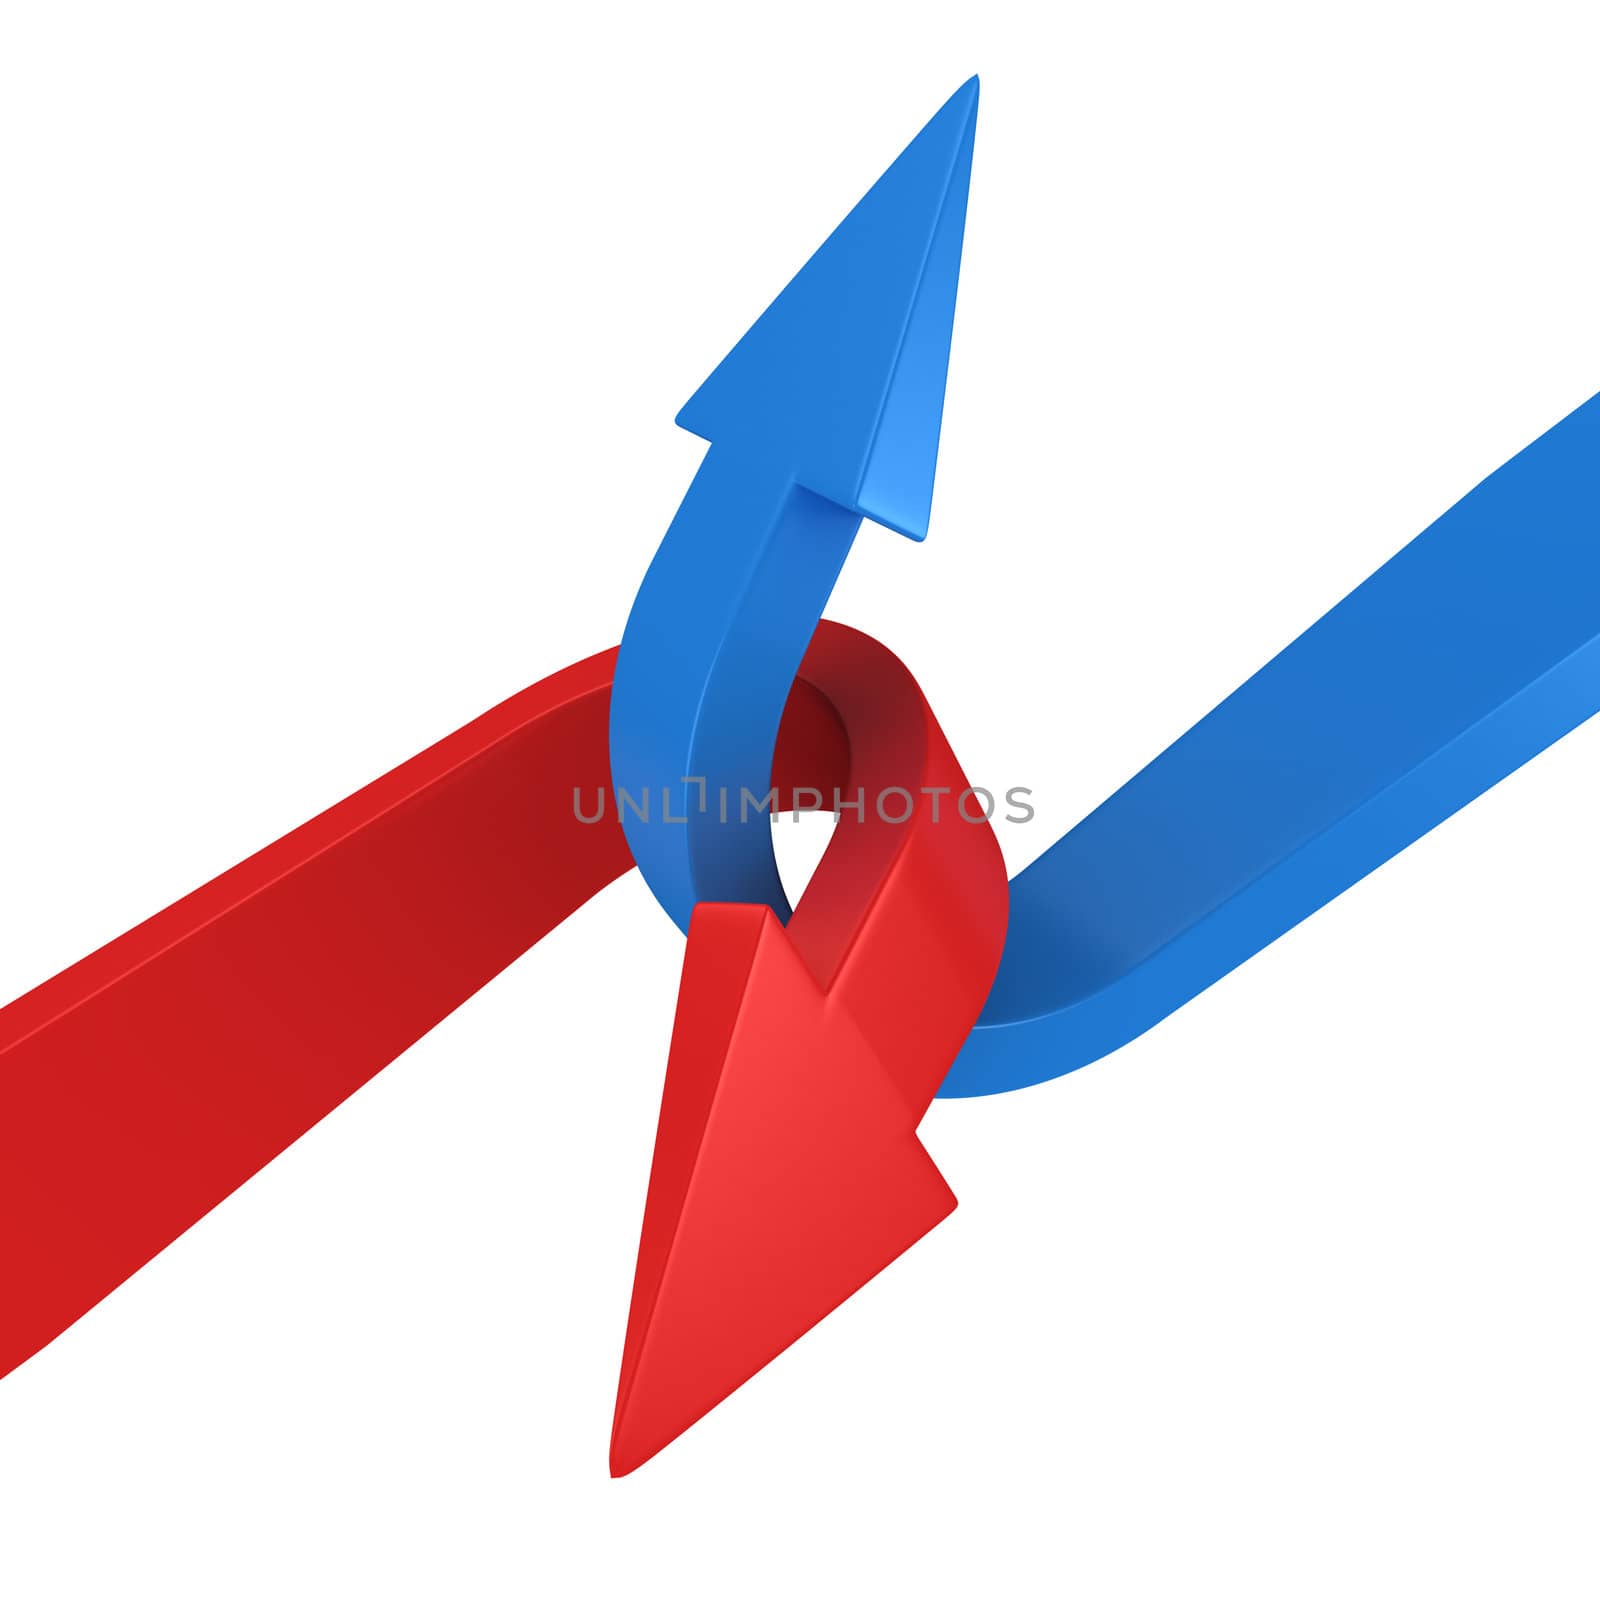 Blue and red arrows connecting on the white background